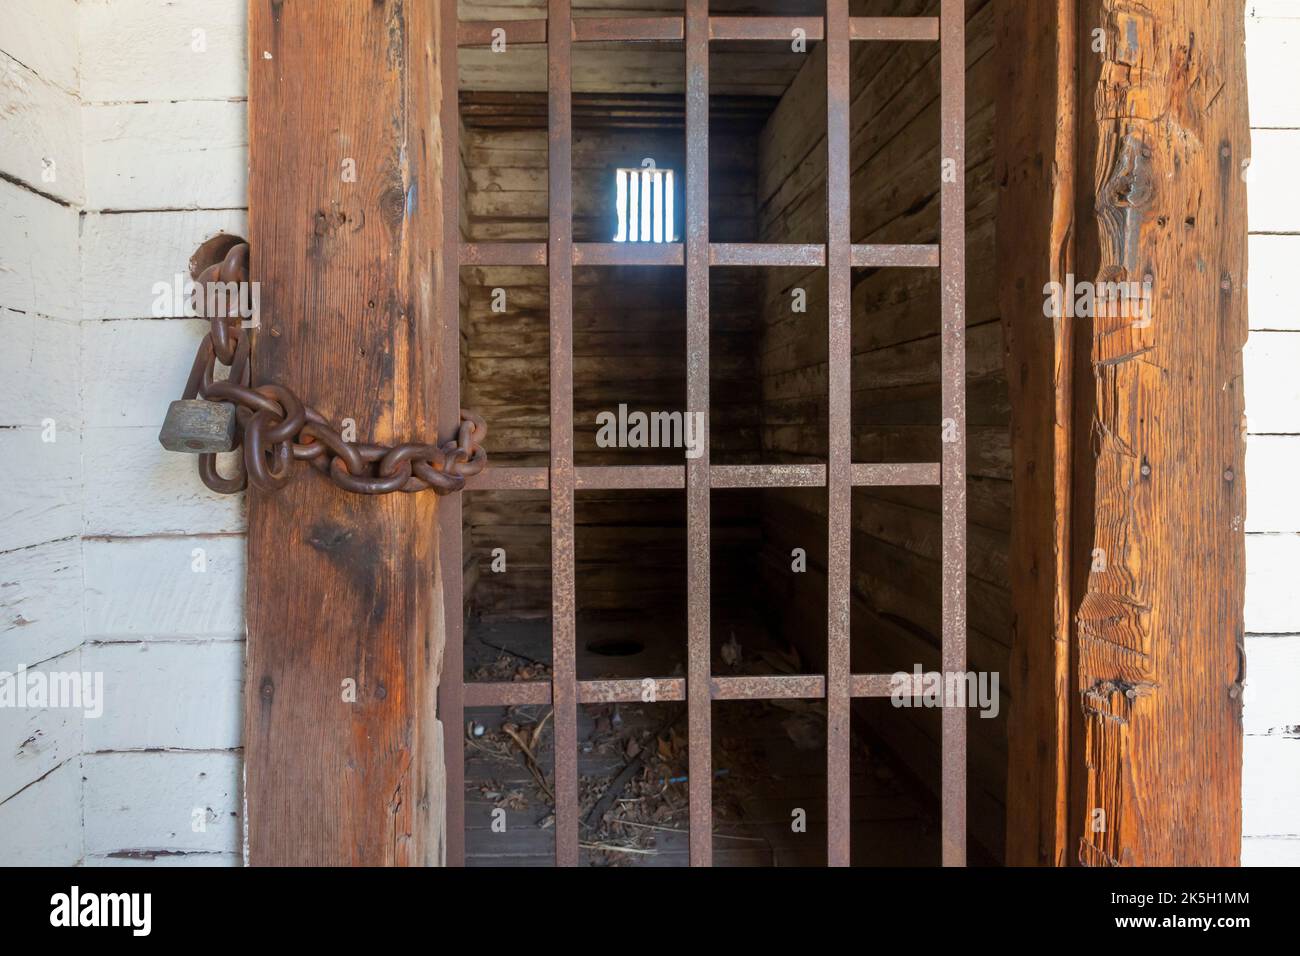 Dodge City, Kansas - The jail at Boot Hill Museum. The museum preserves the history and culture of the old west. Located on the site of the city's old Stock Photo